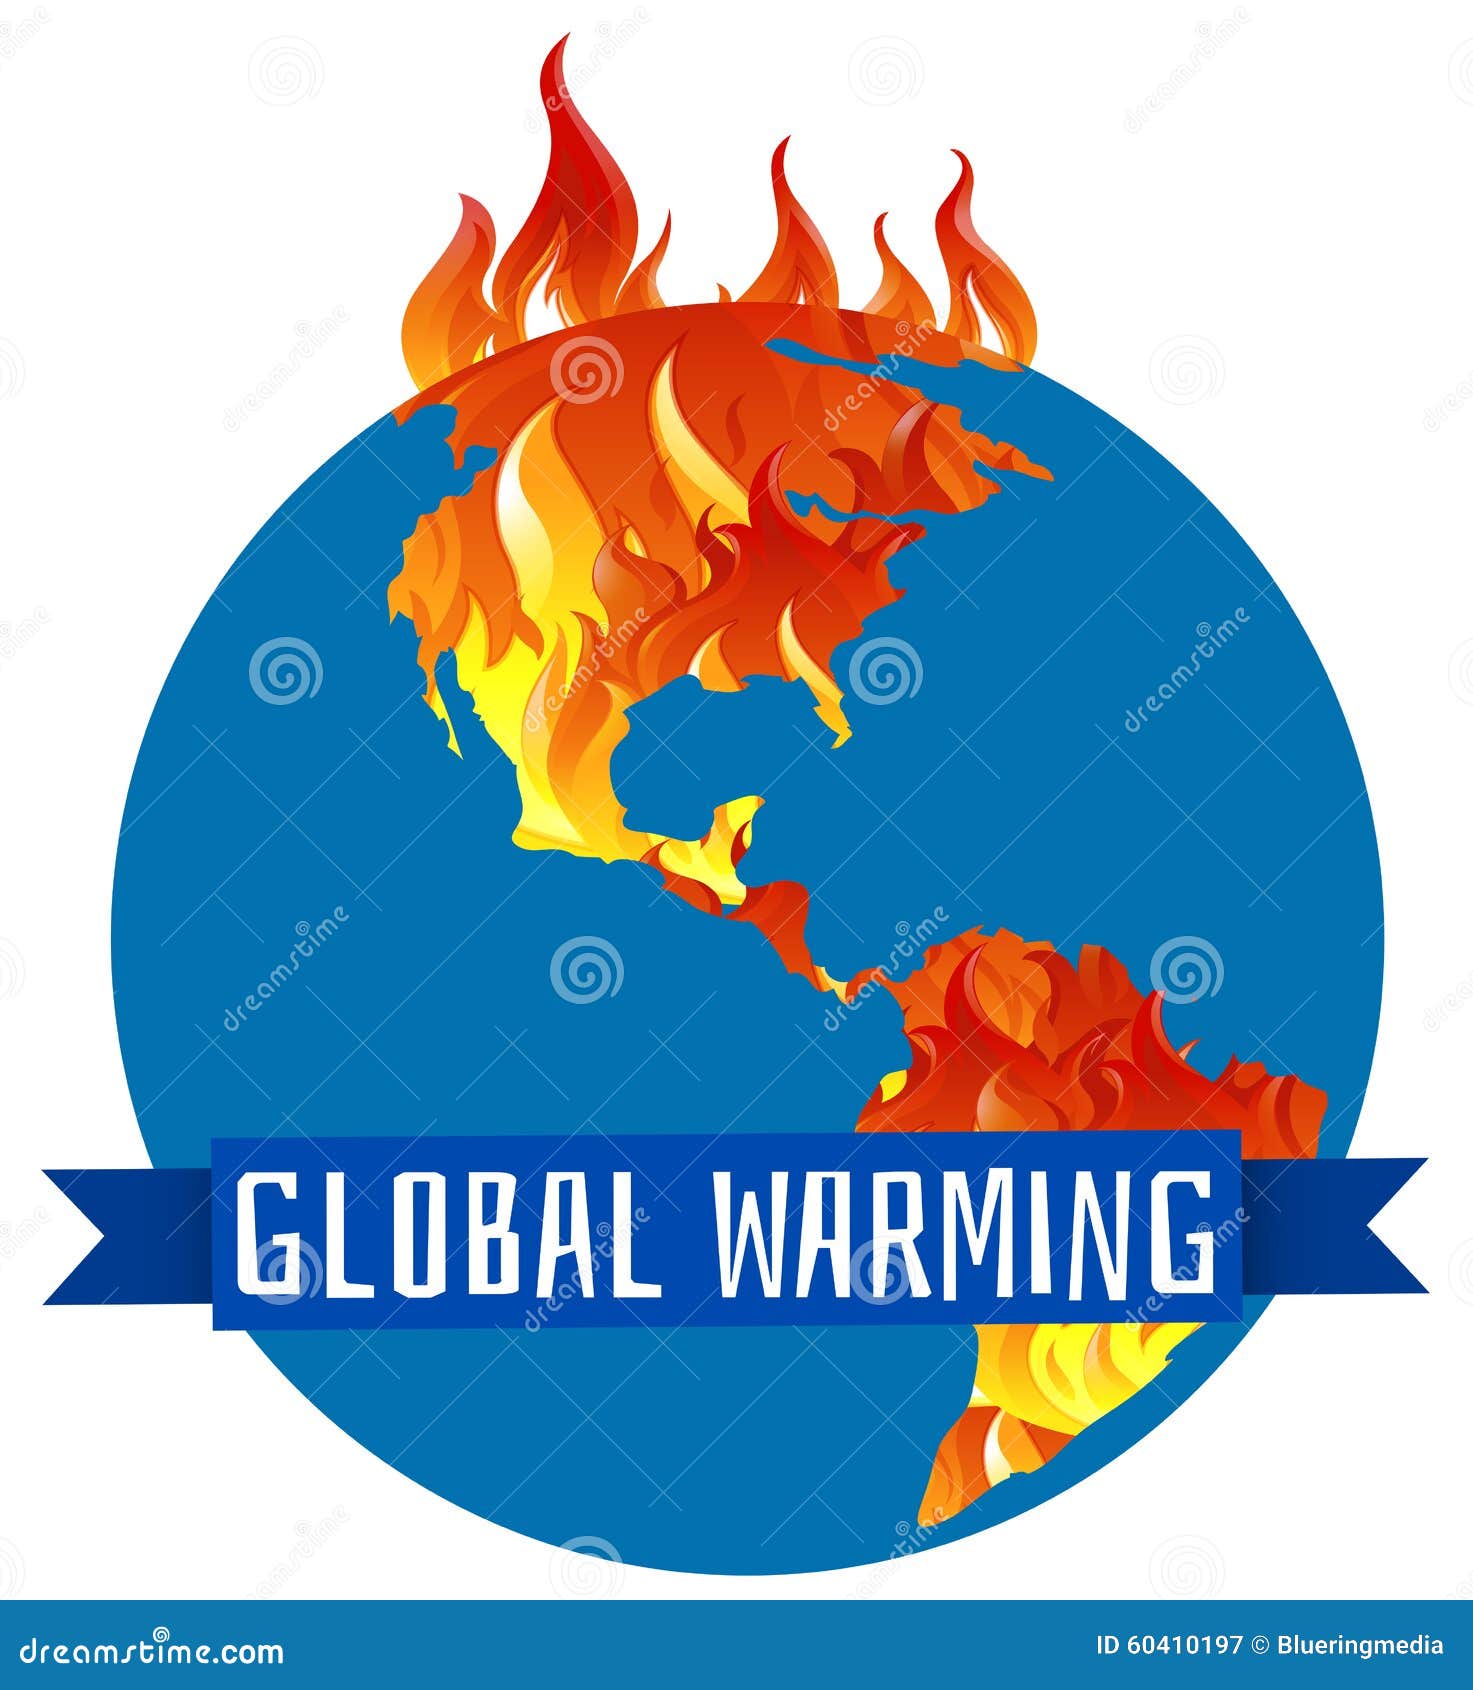 global warming clipart - photo #34